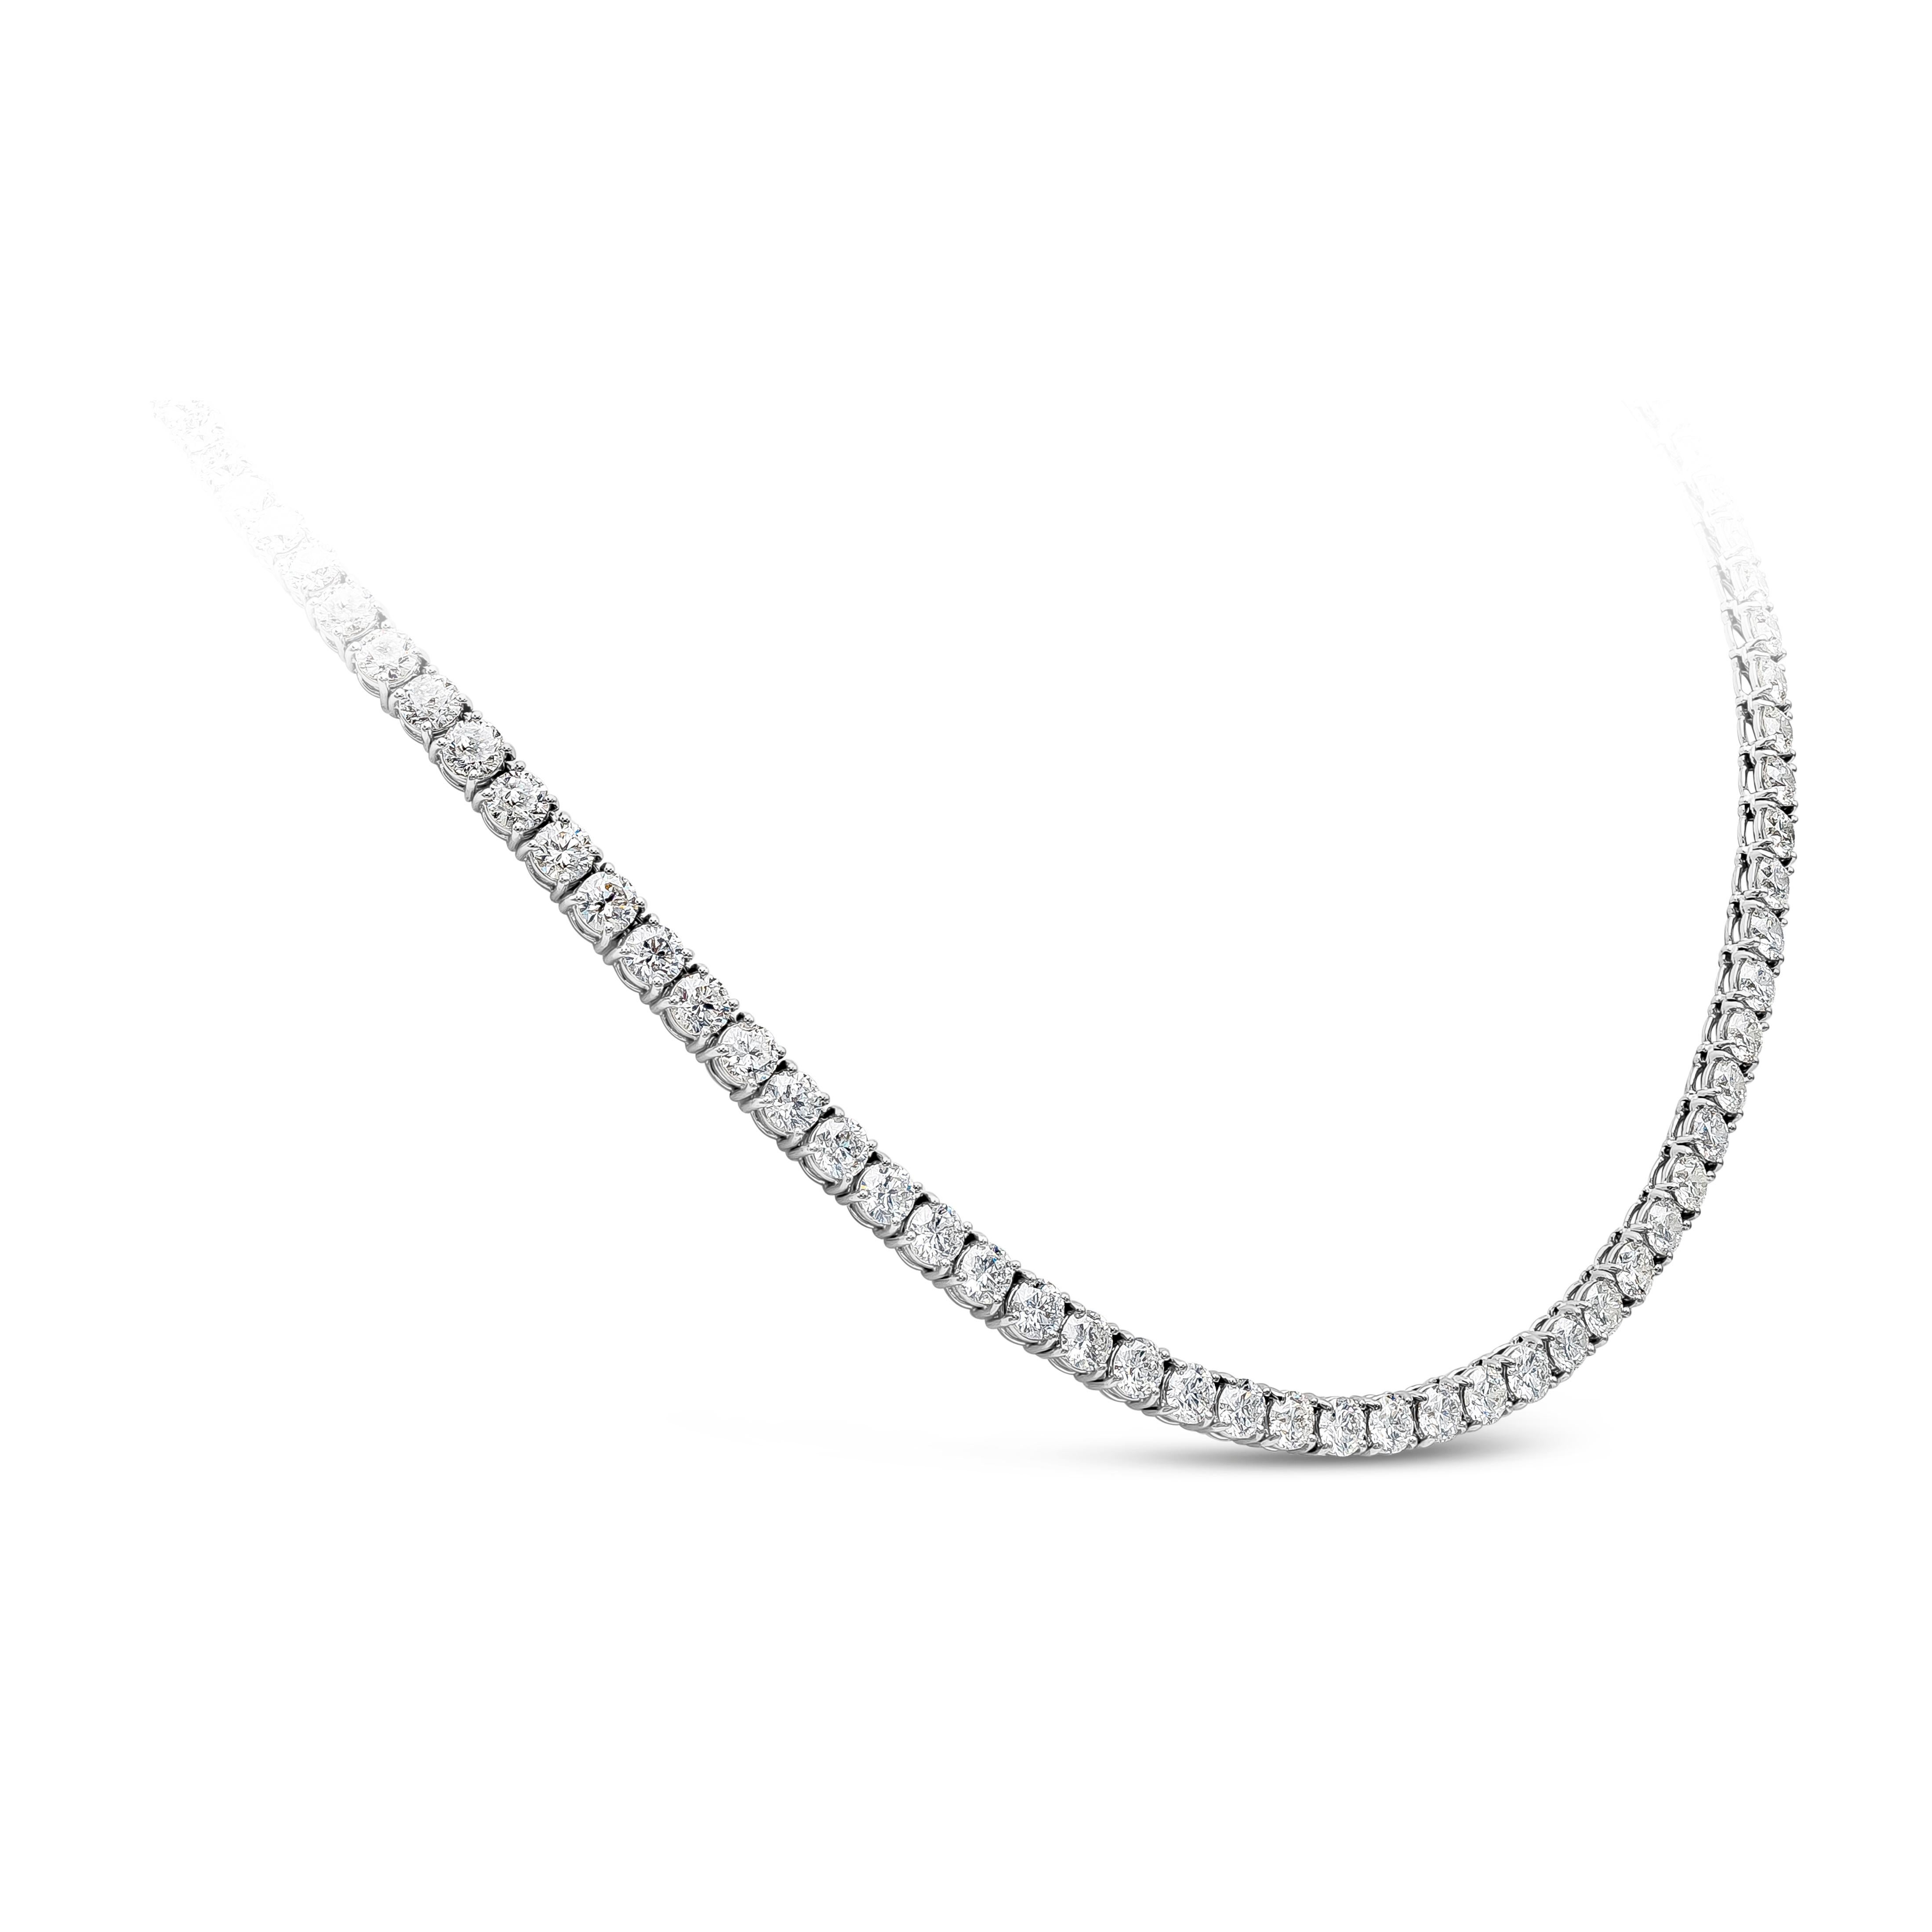 A simple and elegant tennis necklace showcasing a row of round brilliant diamonds weighing 29.43 carats total, F-G color and SI2-I1 in clarity, set in a classic four prong basket setting. Finely made in a polished 18K white gold mounting and 17